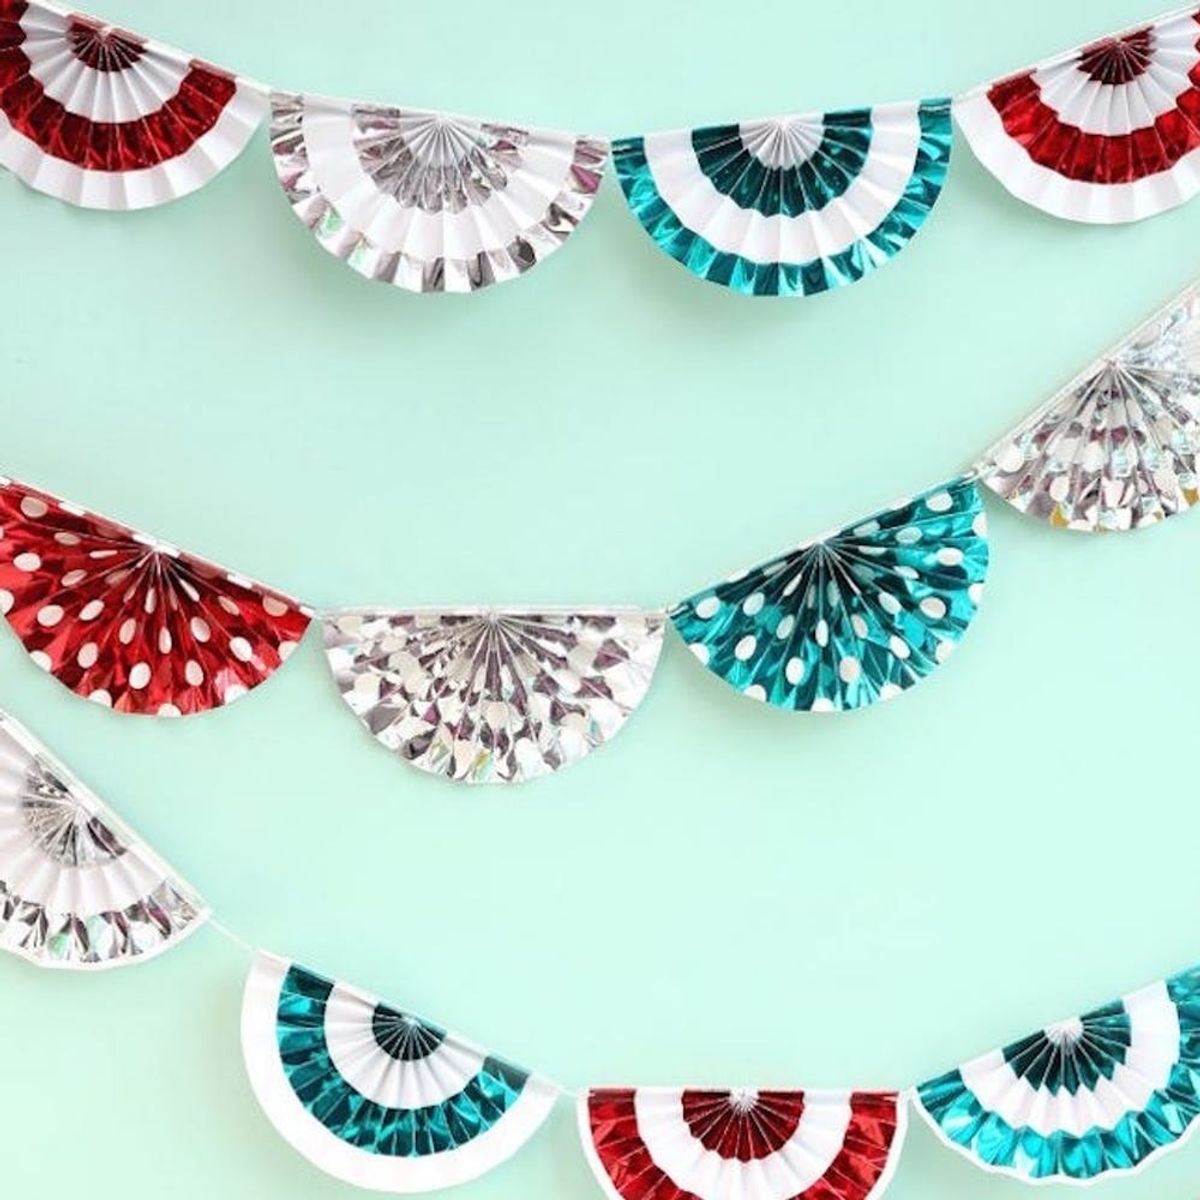 13 Modern + Colorful DIY Ideas for Decorating Your Porch This 4th of July